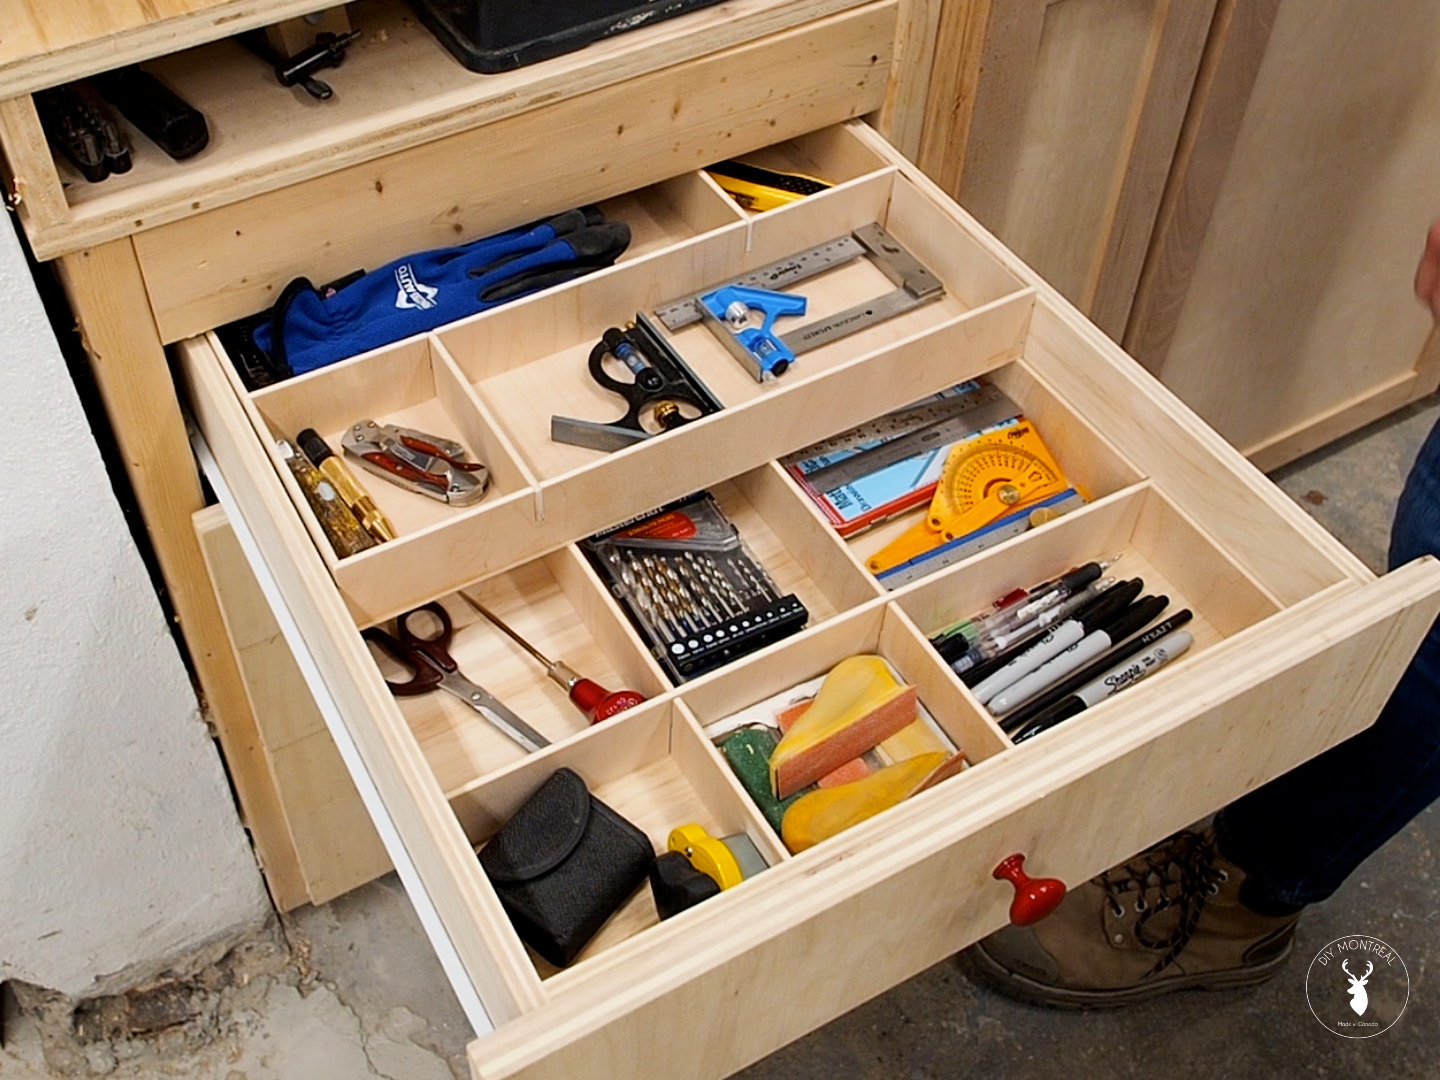 https://www.diymontreal.com/wp-content/uploads/2021/11/DIY-Drawer-Organizers-Dividers-and-Sliding-Tray.jpg